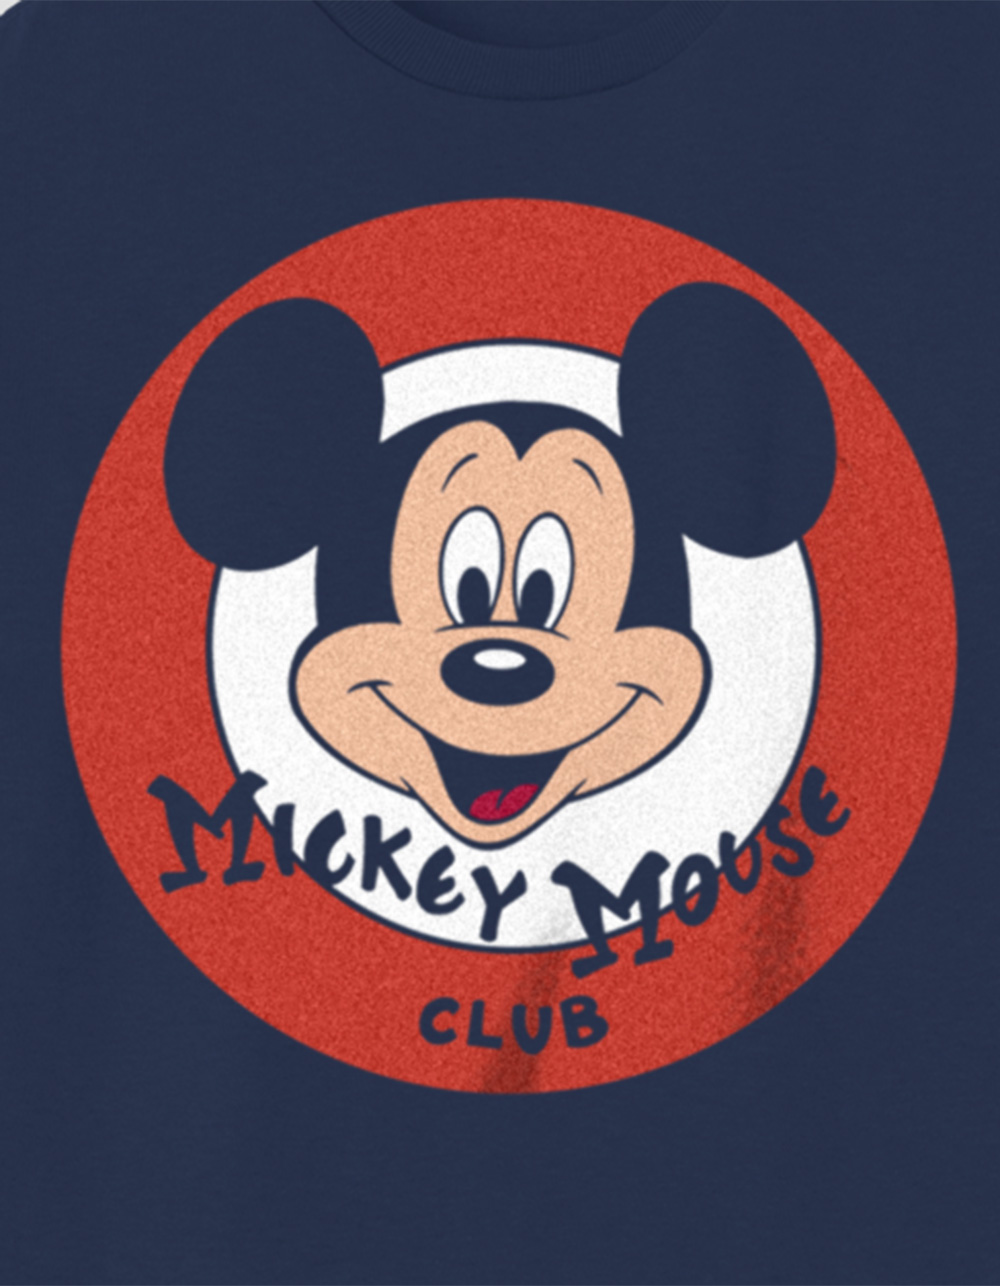 Official Disney 100th Anniversary Mickey Mouse Club Logo Unisex Kids Tee - Navy - Small